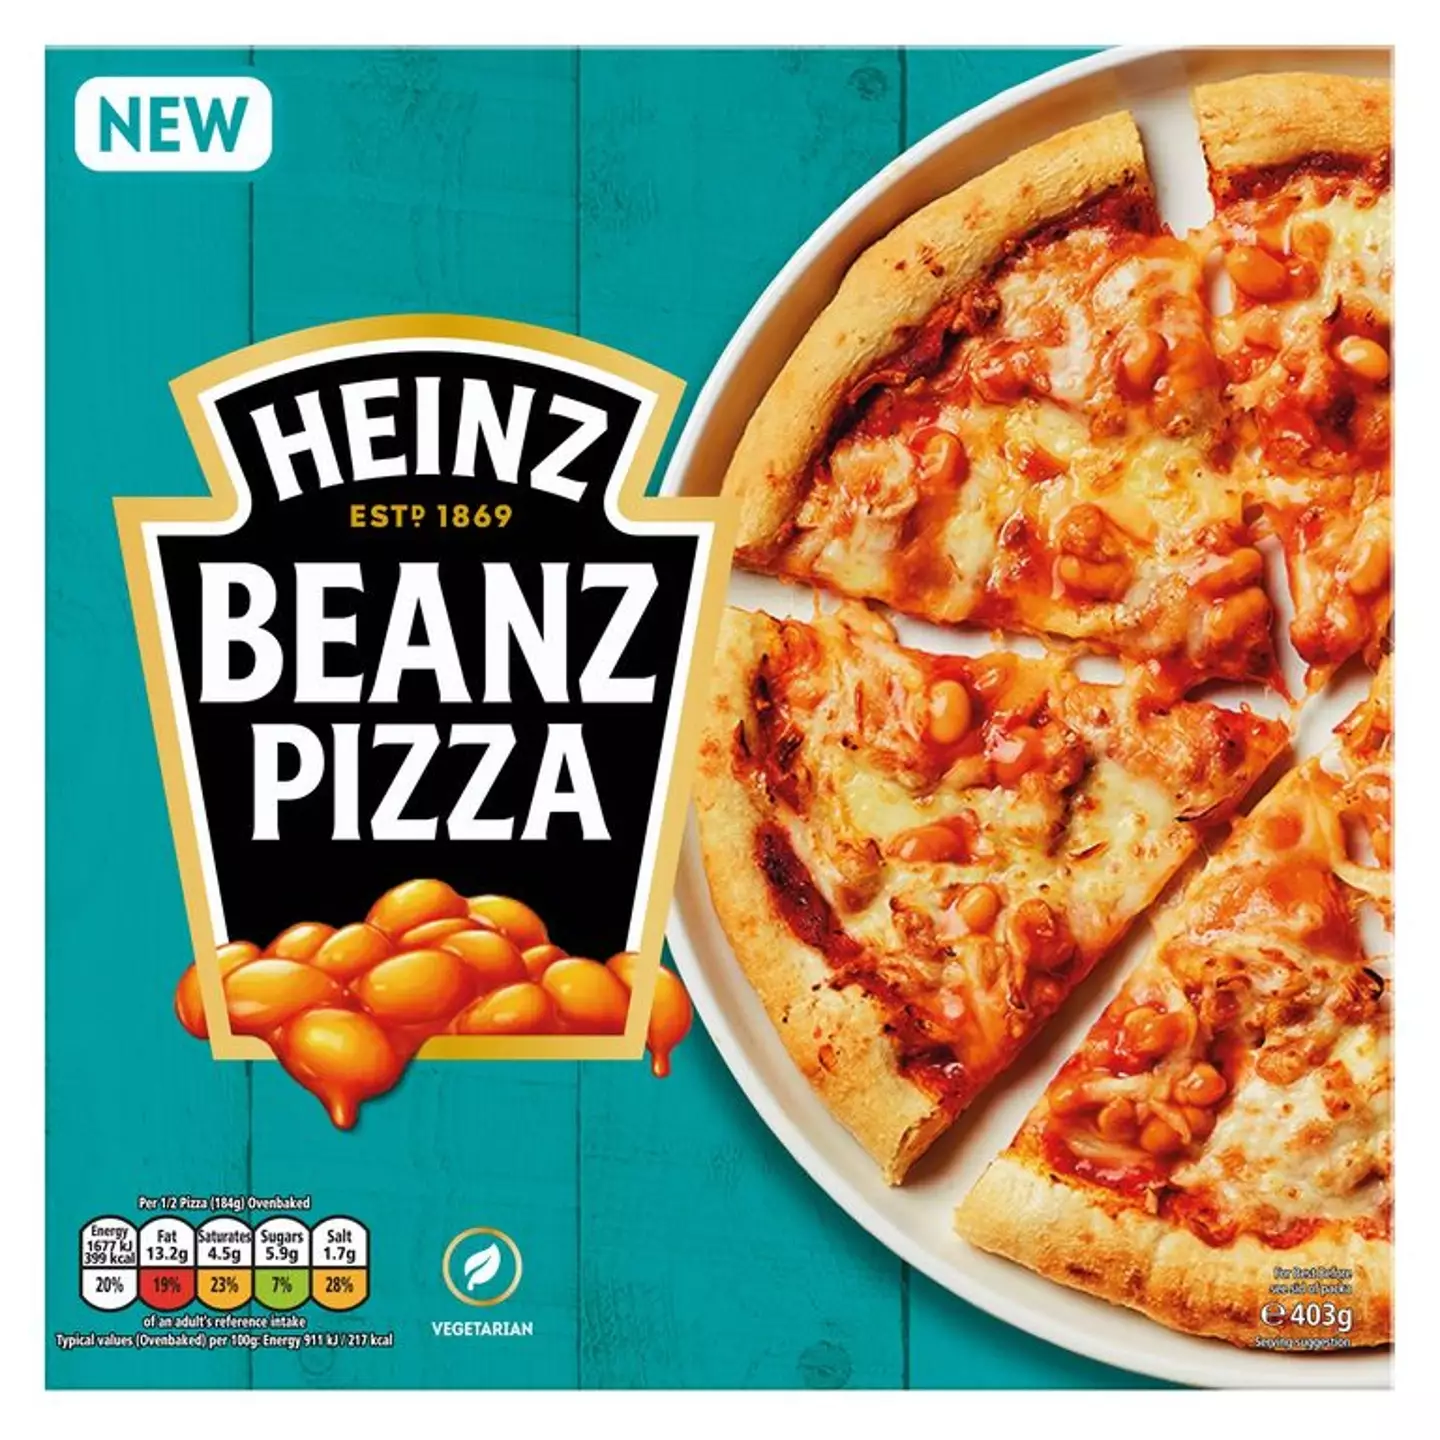 The iconic Heinz Beanz Pizza has returned.